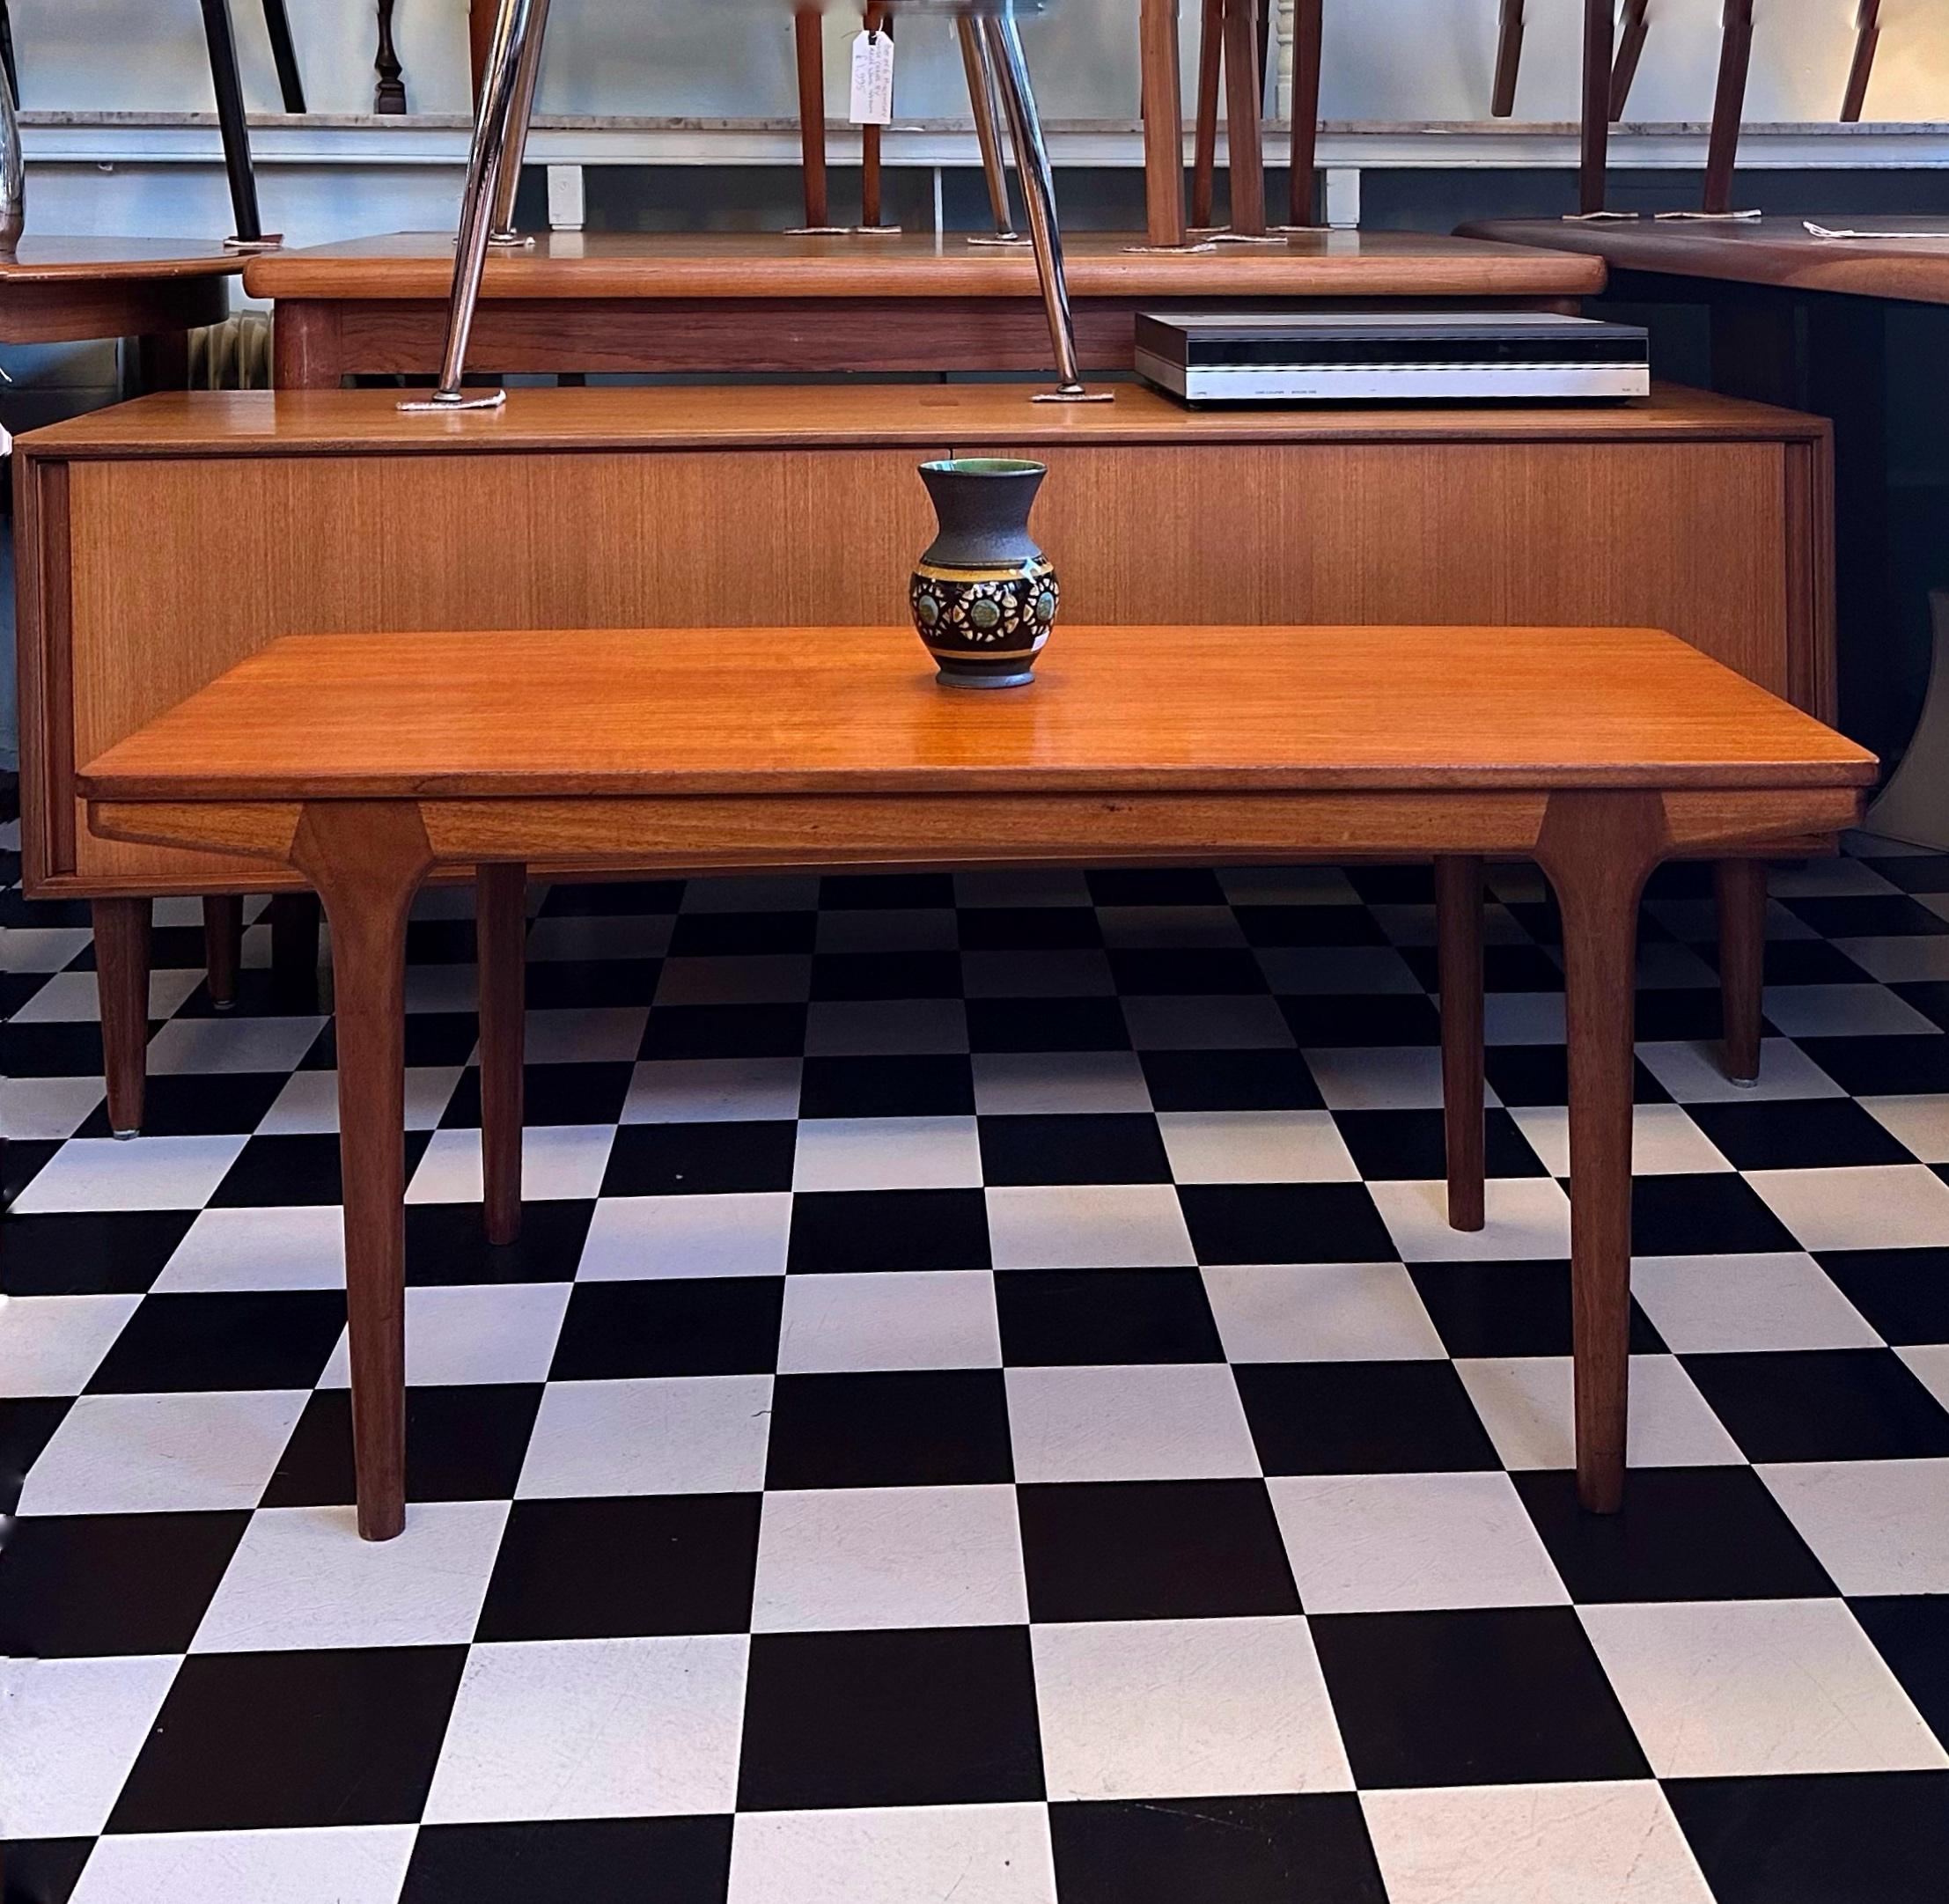 Beautiful mid-century modern teak long coffee table. Designed in 1960's by A.H. McIntosh. Features two extentions with Formica finish which is great for putting drinks down. Very stylish and quality piece. Lustrous top with golden teak grain and